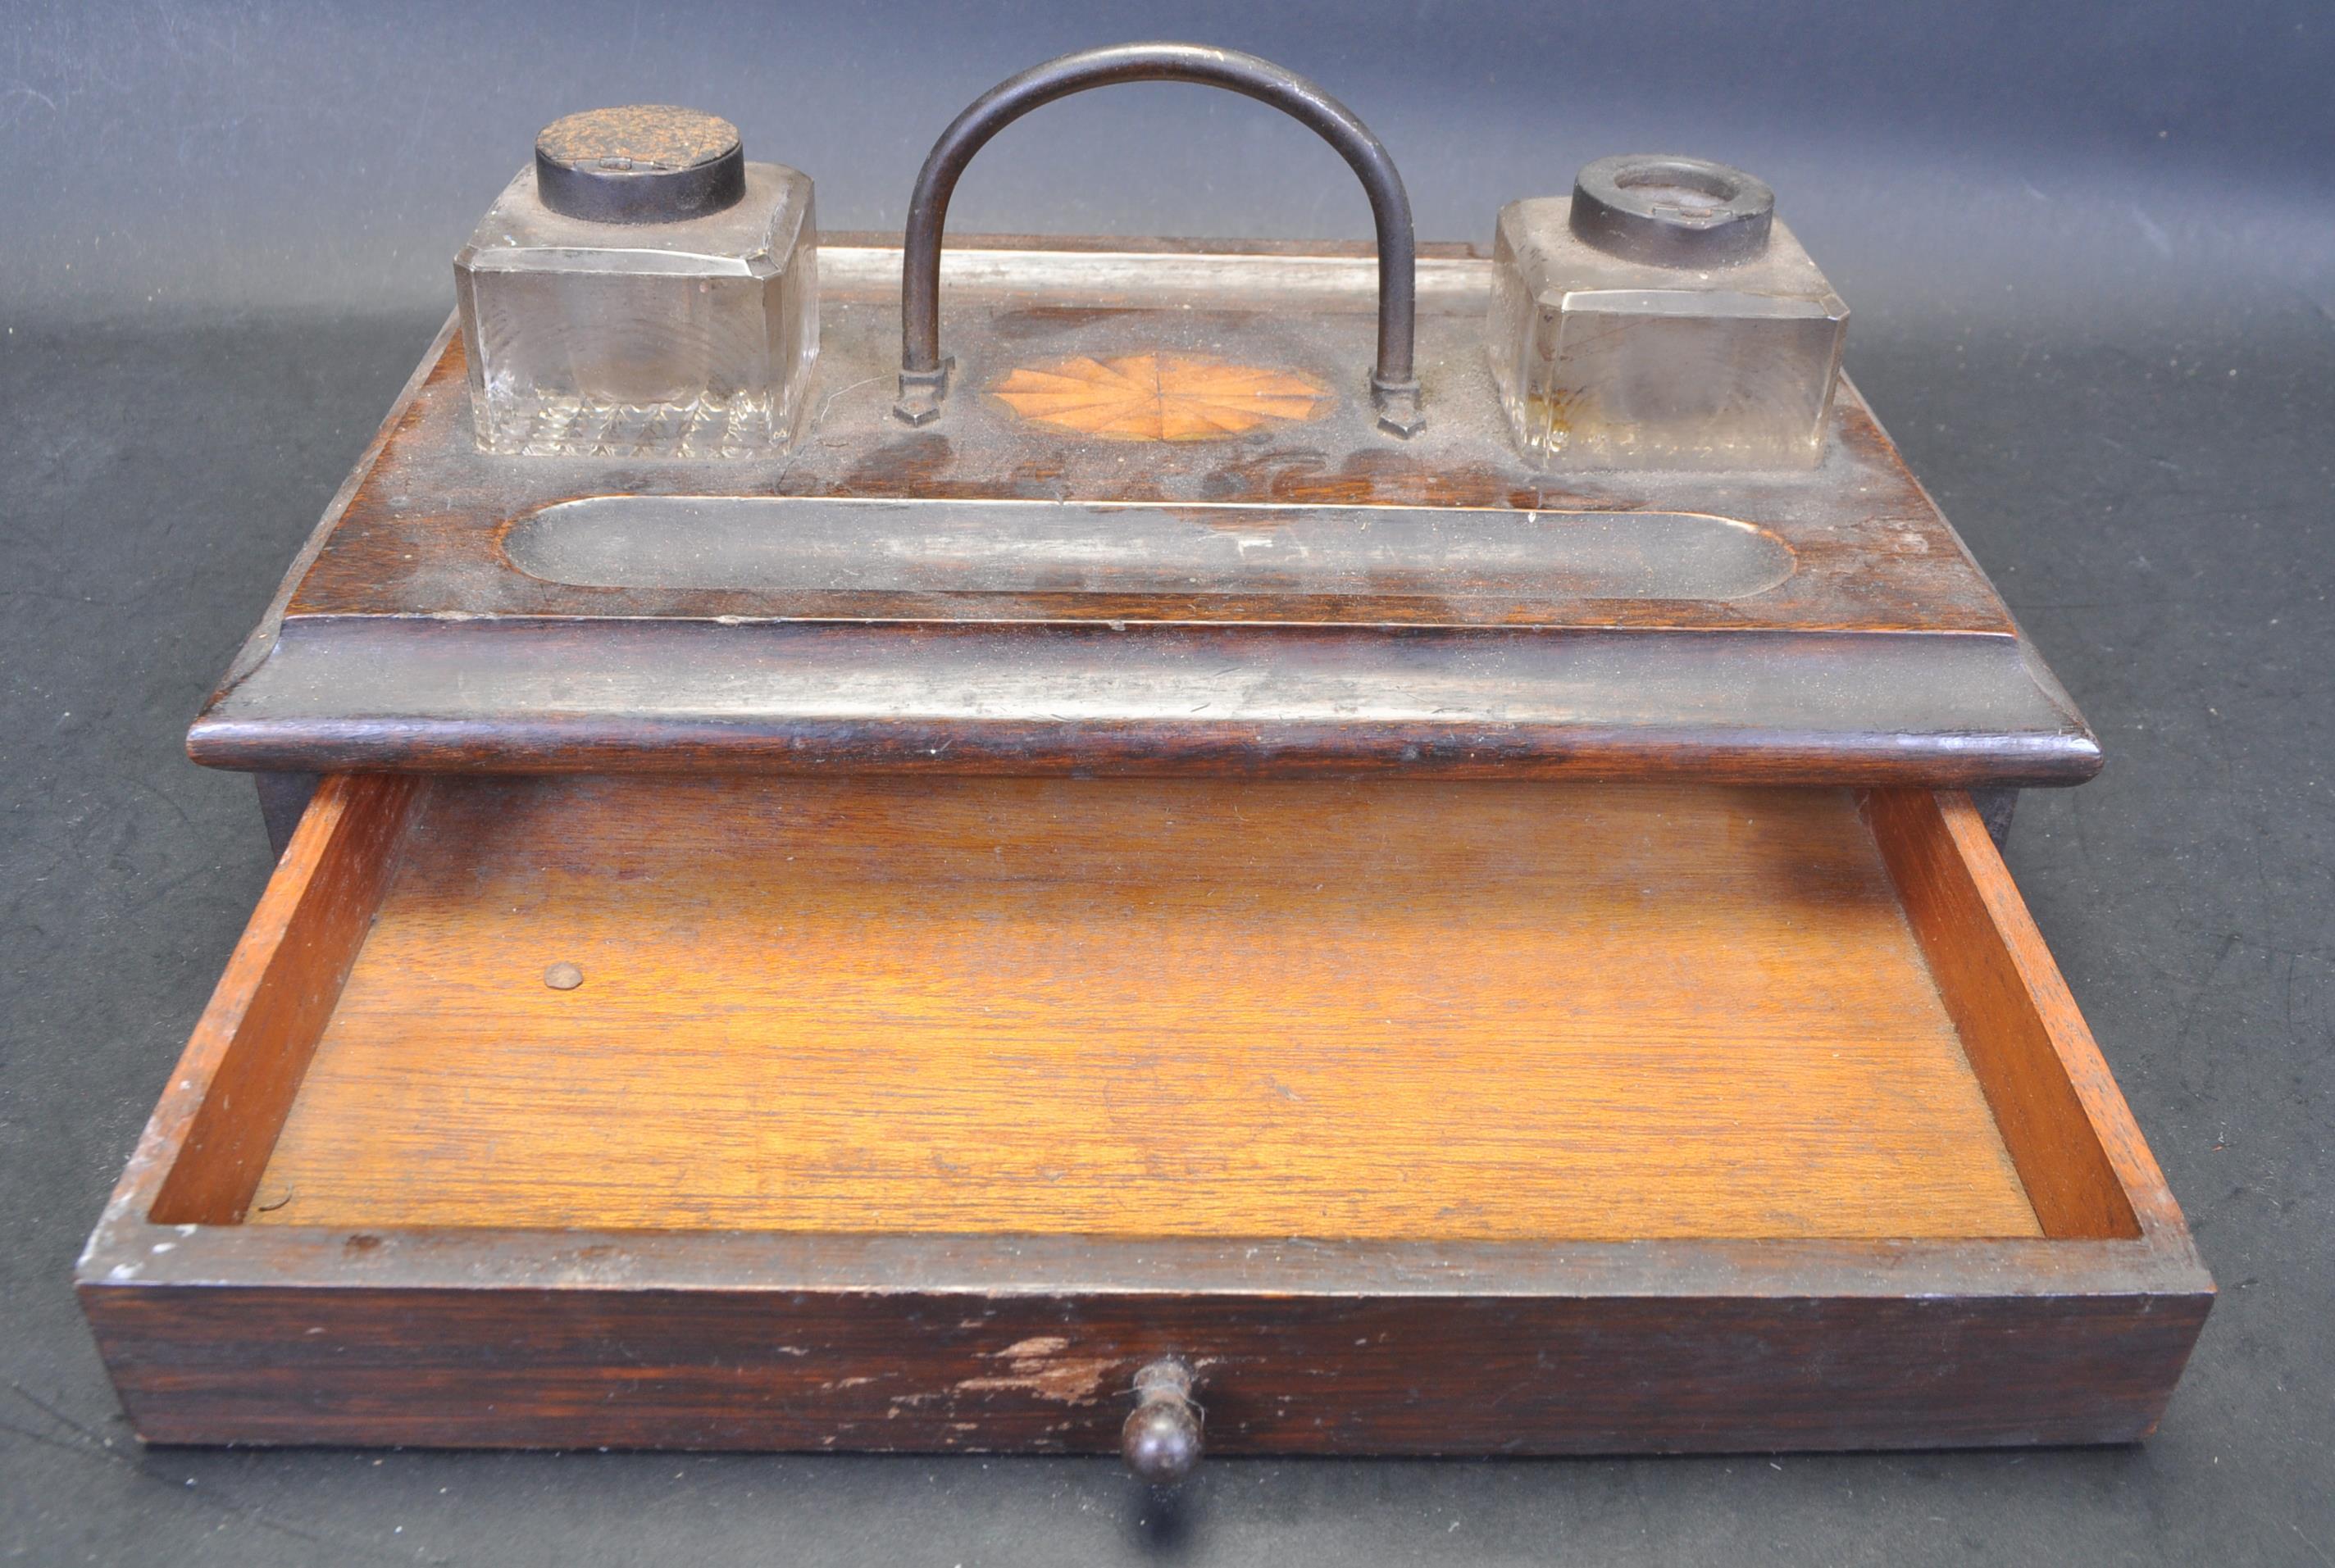 EARLY 20TH CENTURY EDWARDIAN INK WELL / DESK TIDY - Image 3 of 6